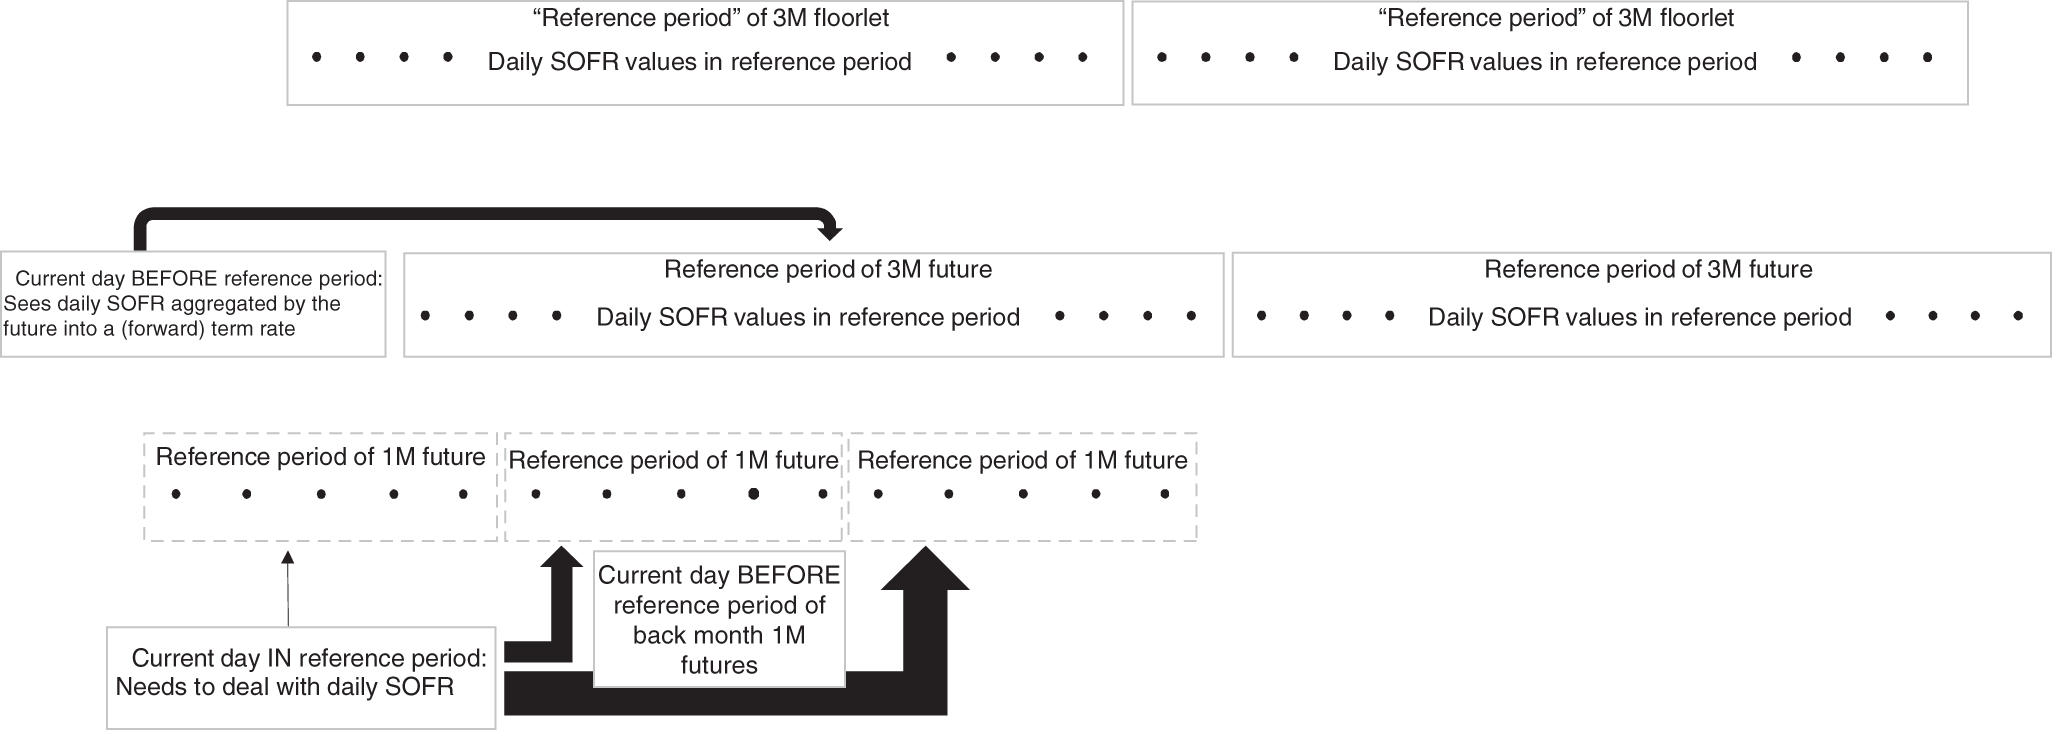 An illustration of the aggregation of daily SOFR via the future before the reference period starts and via floorlets